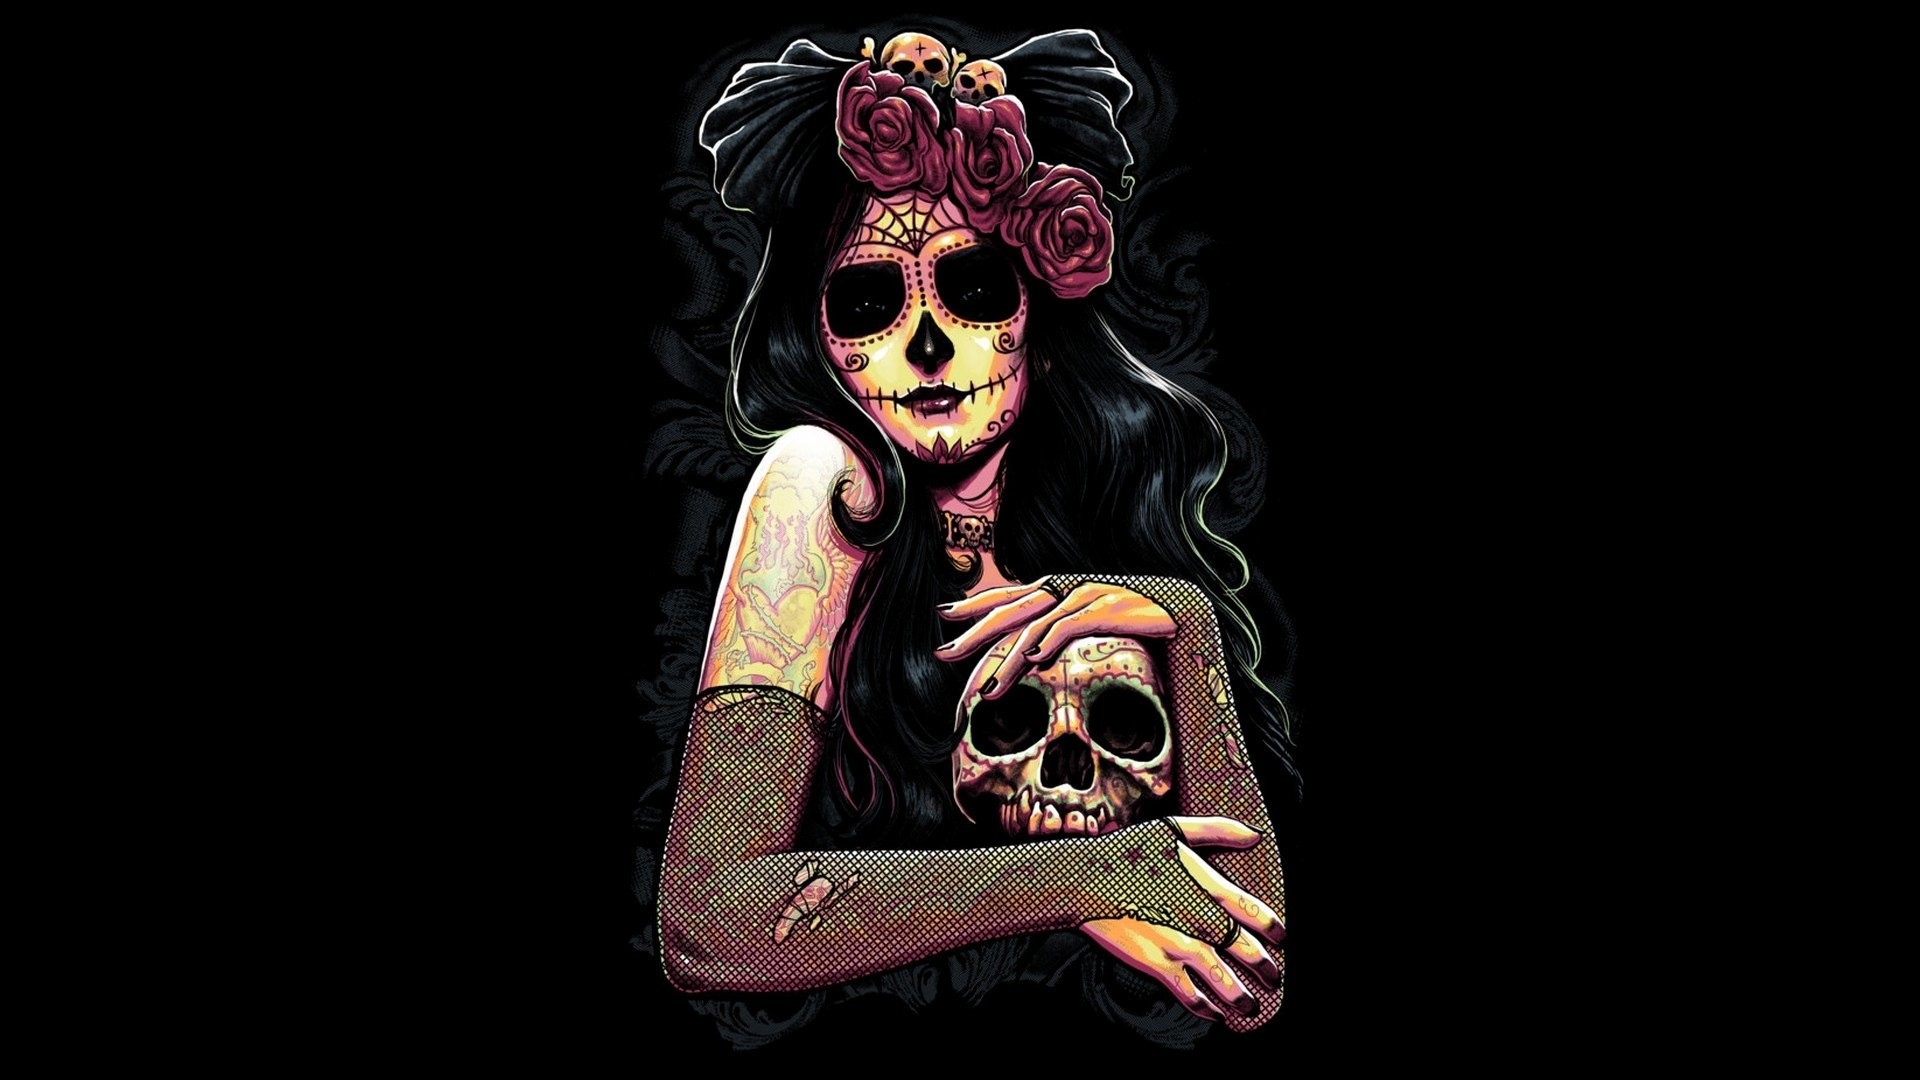 1920x1080 Images For gt Awesome Skull Wallpapers Hd Pinterest